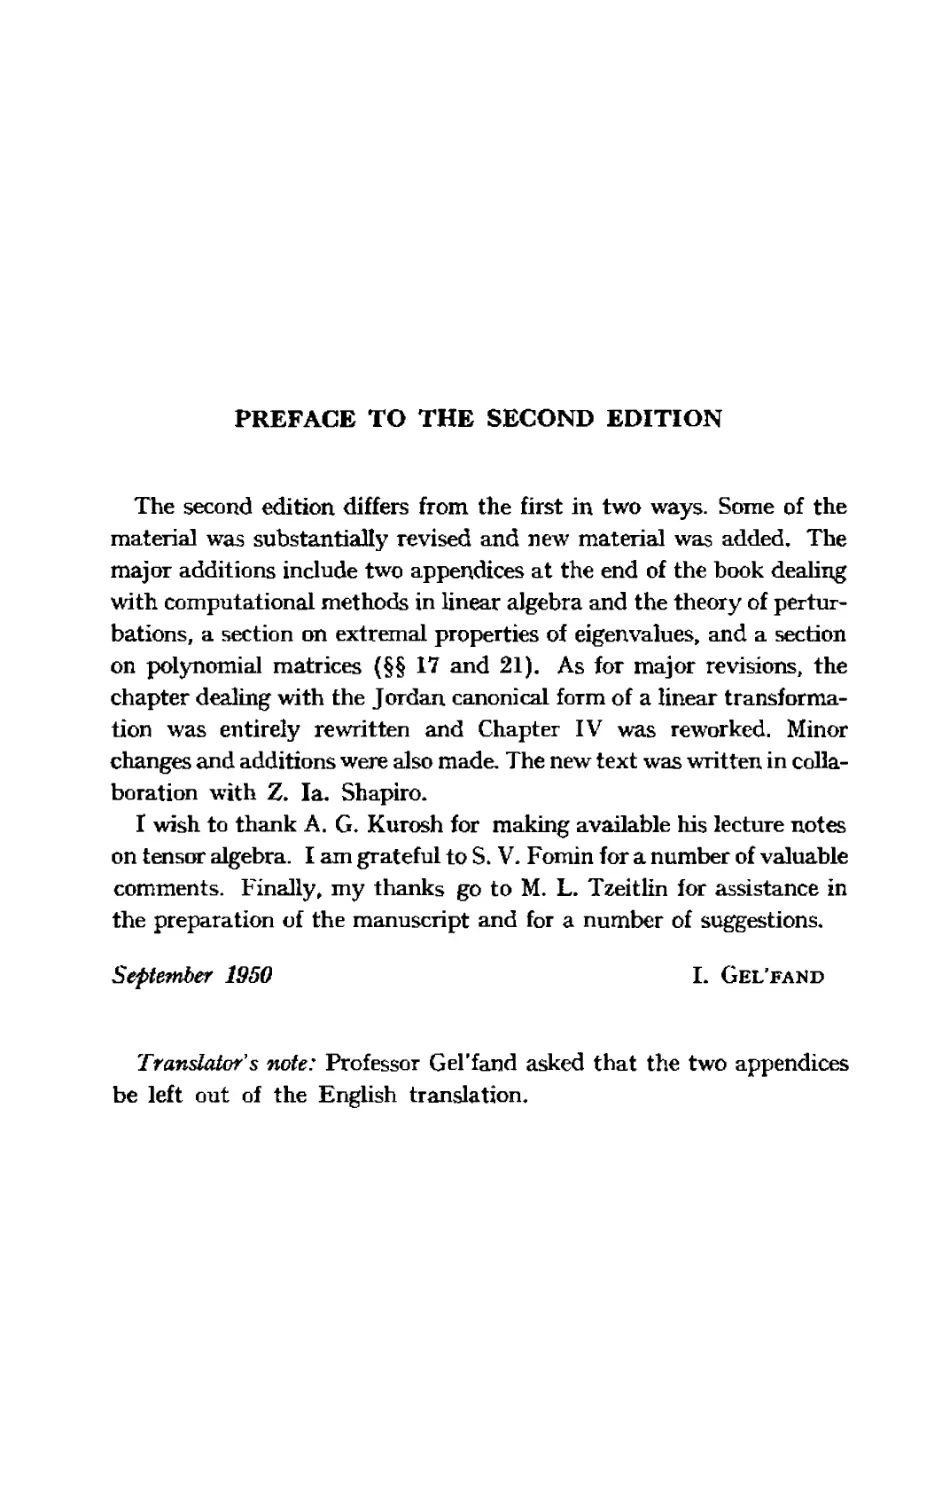 Preface to the second edition